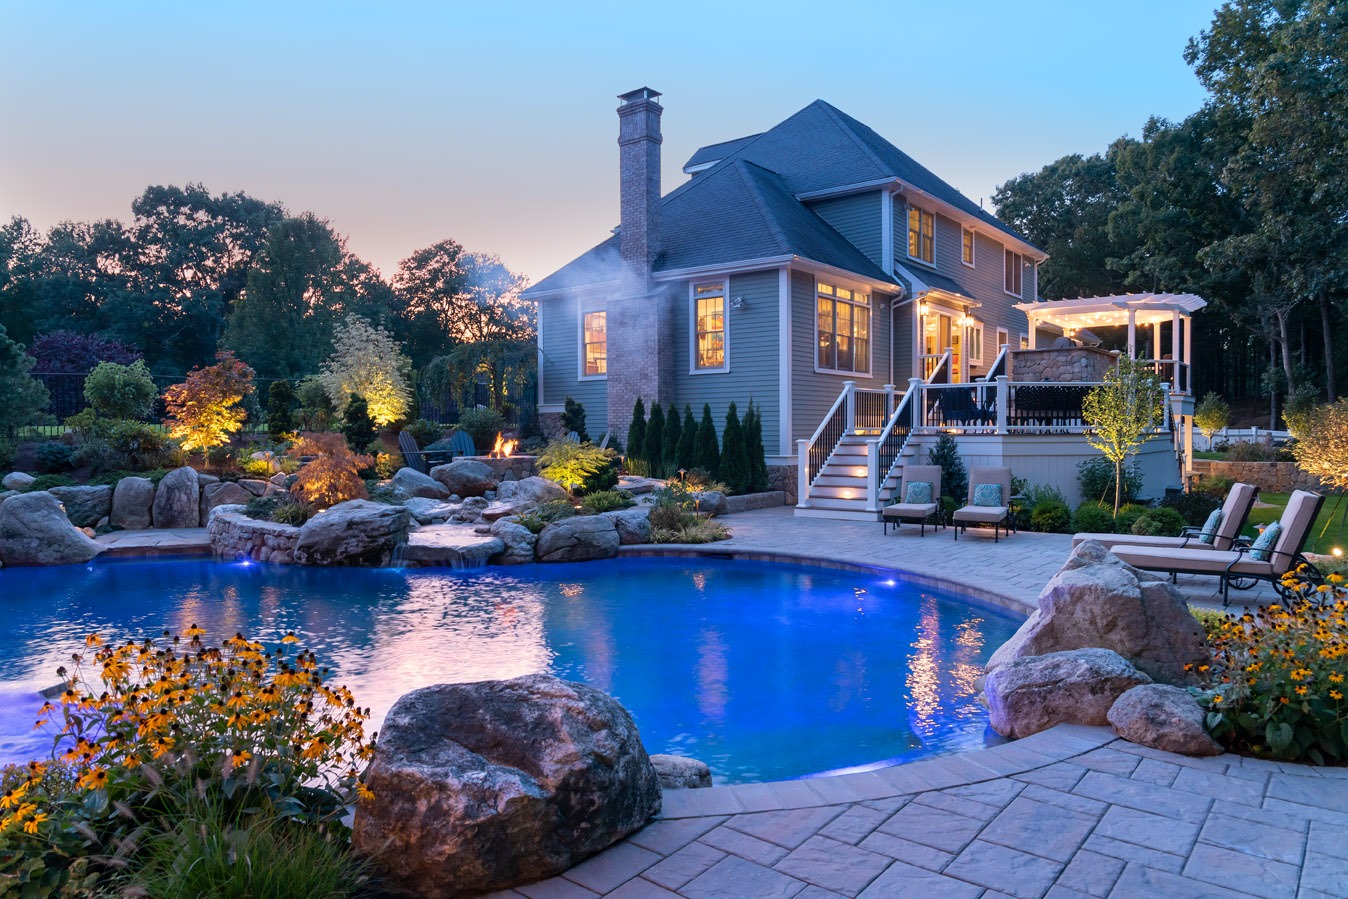 A luxurious house at dusk with lights on, featuring an illuminated blue pool surrounded by rocks, landscaping, and an inviting outdoor living space.